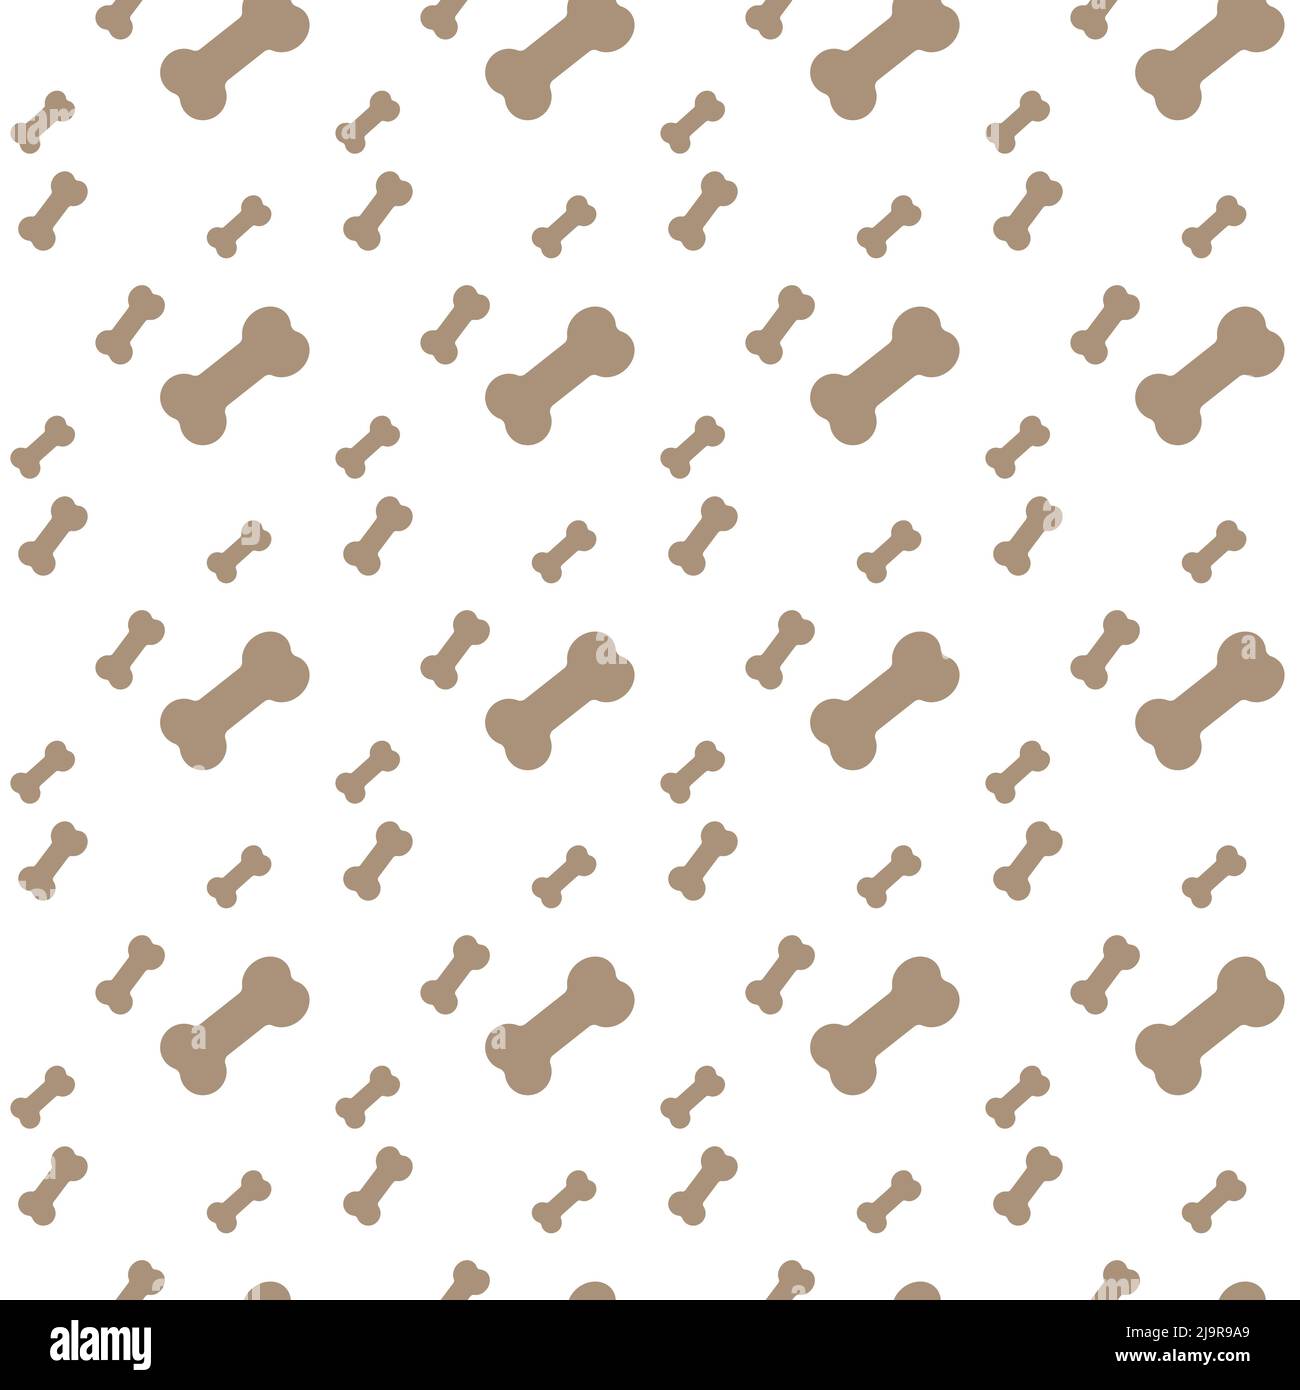 Bone seamless pattern. Background with dog bone. Bone for dog seamless texture Stock Vector